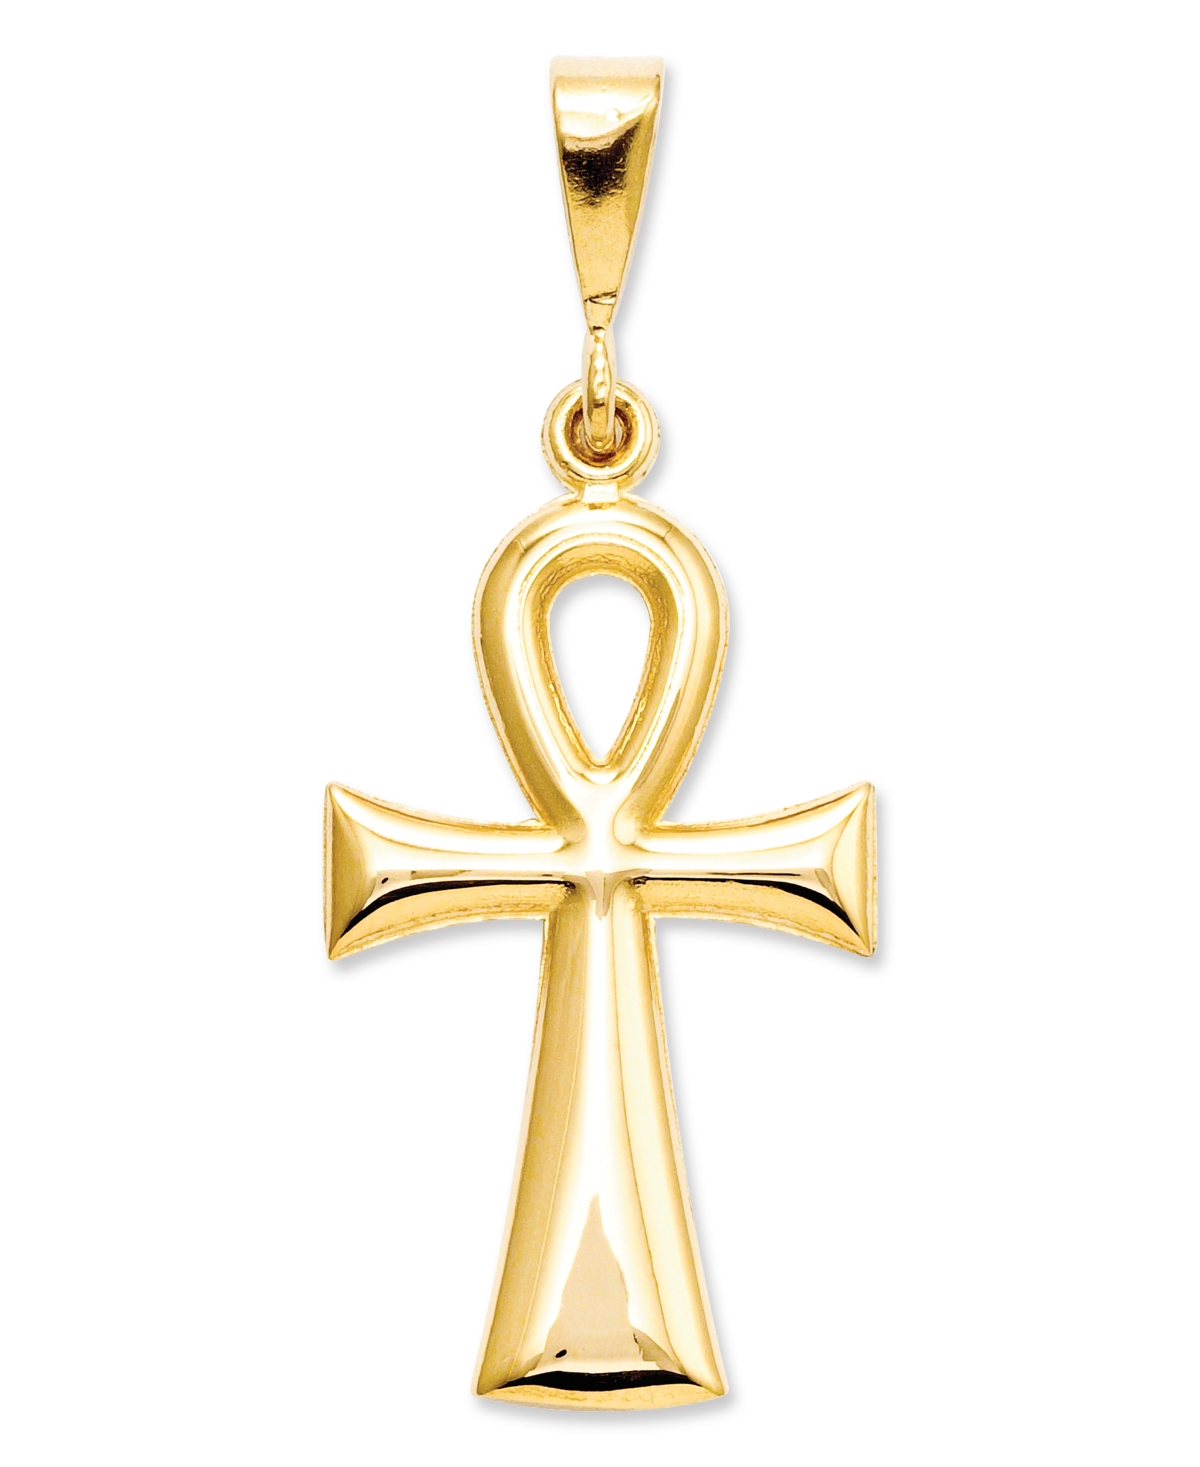 Charm 14K YELLOW GOLD ANKH CROSS  Pendant Made in USA